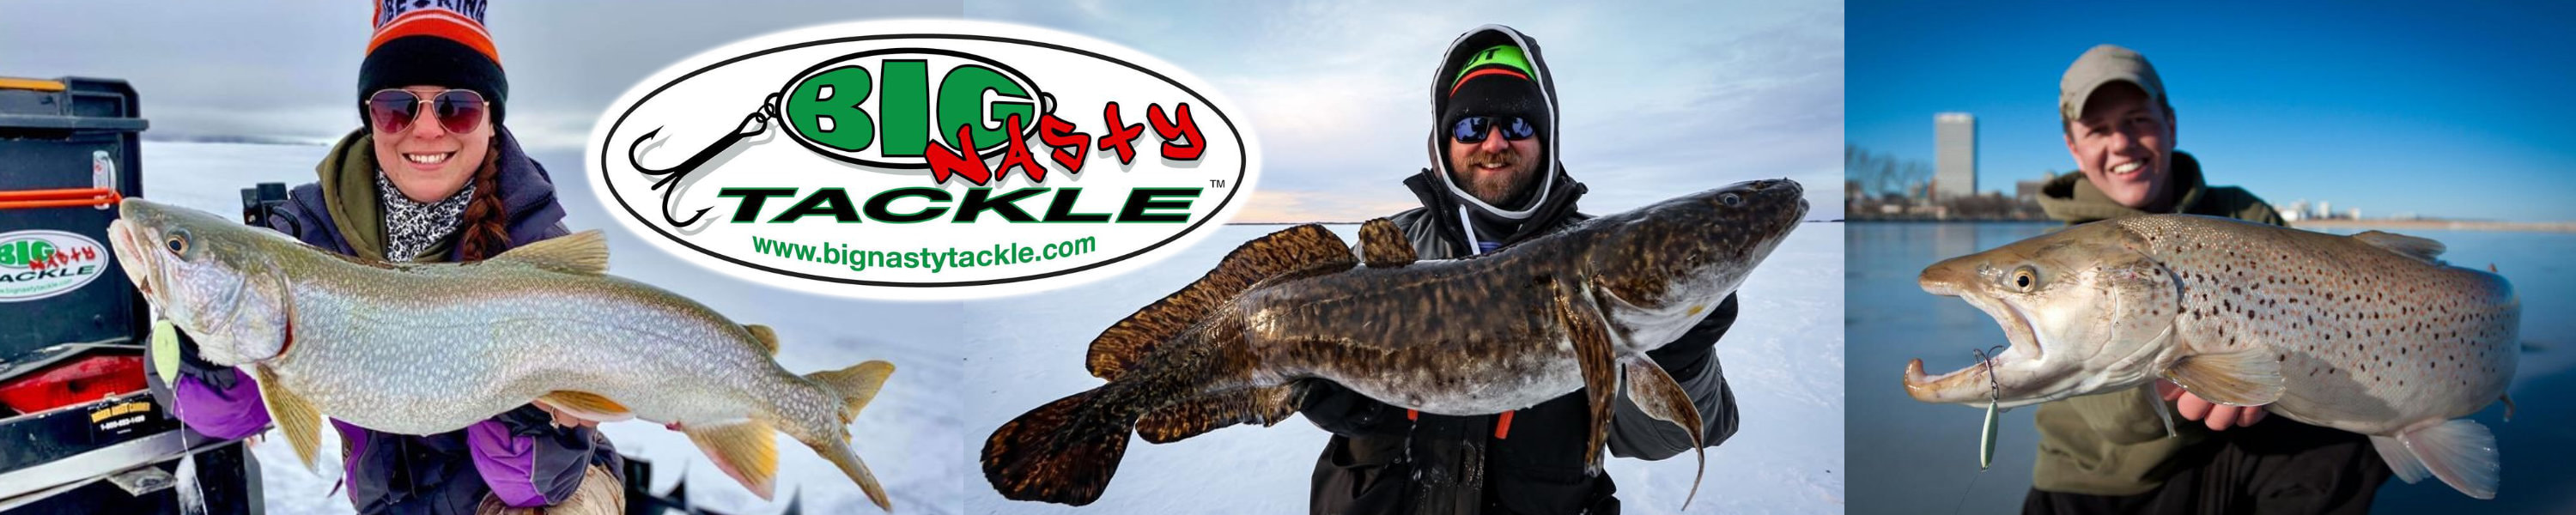 Big Nasty Tackle - Home of the Trout-N-Pout Spoon and Pout Pounder Jigs